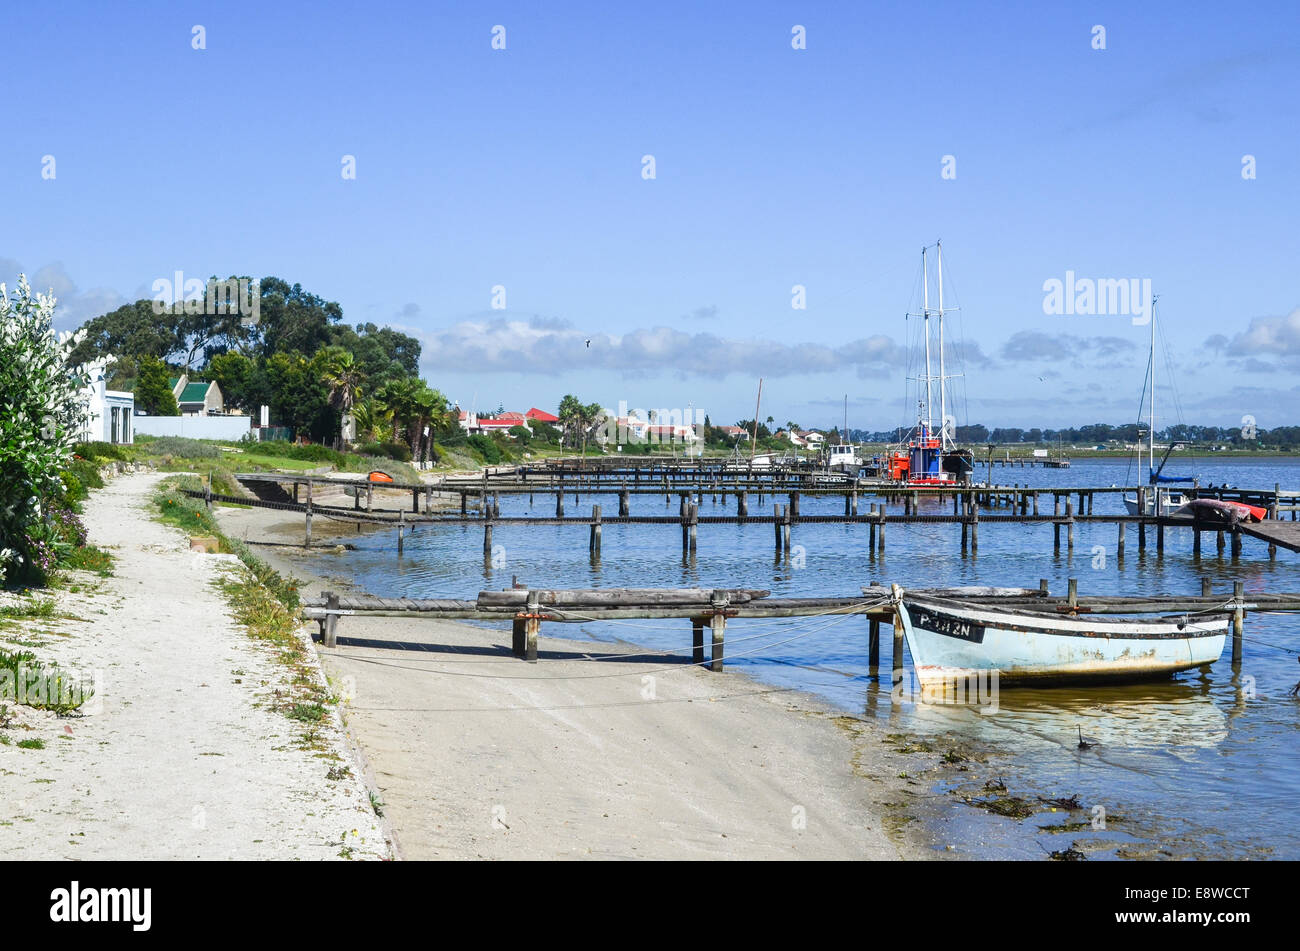 Boats in the port of Velddrif by the Berg river, South Africa Stock Photo